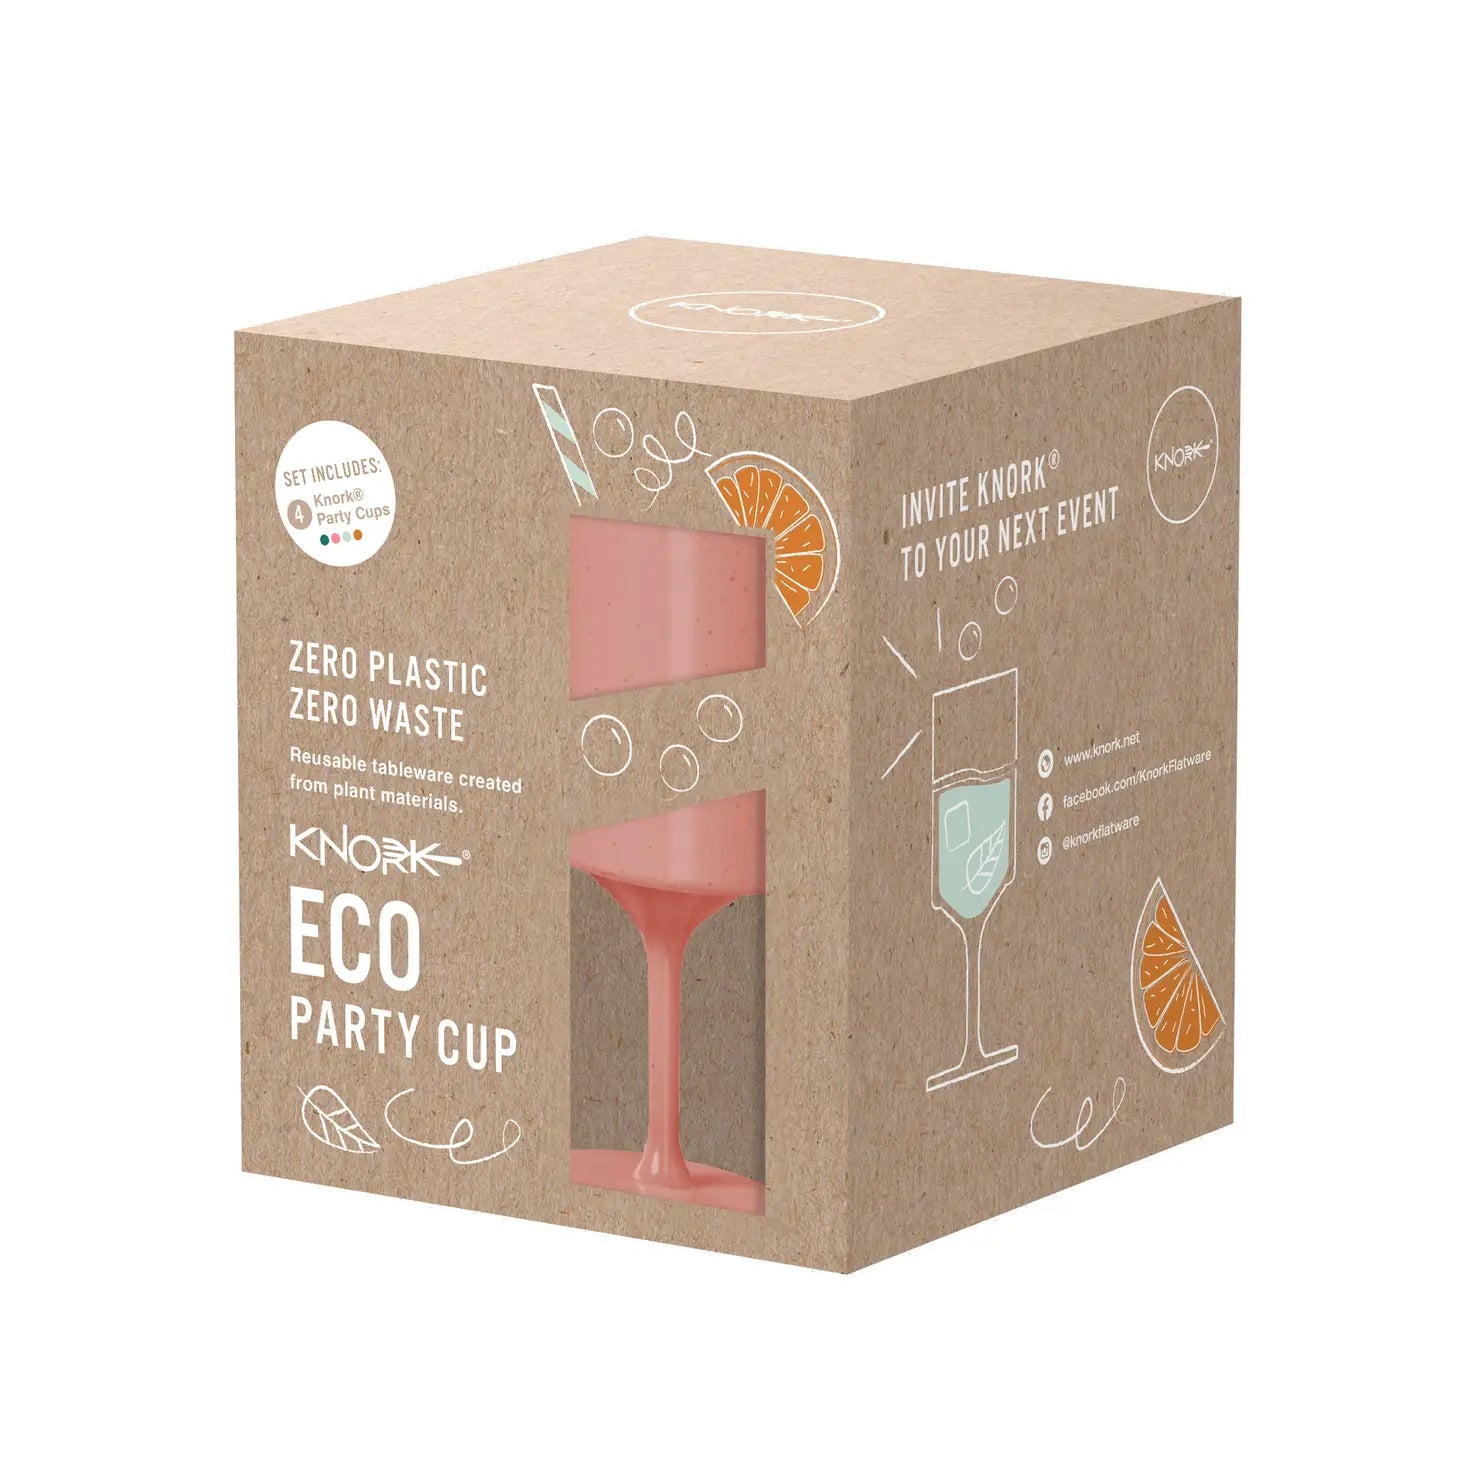 Set of 4 fully compostable and reusable party cups or wine glasses in packaging 